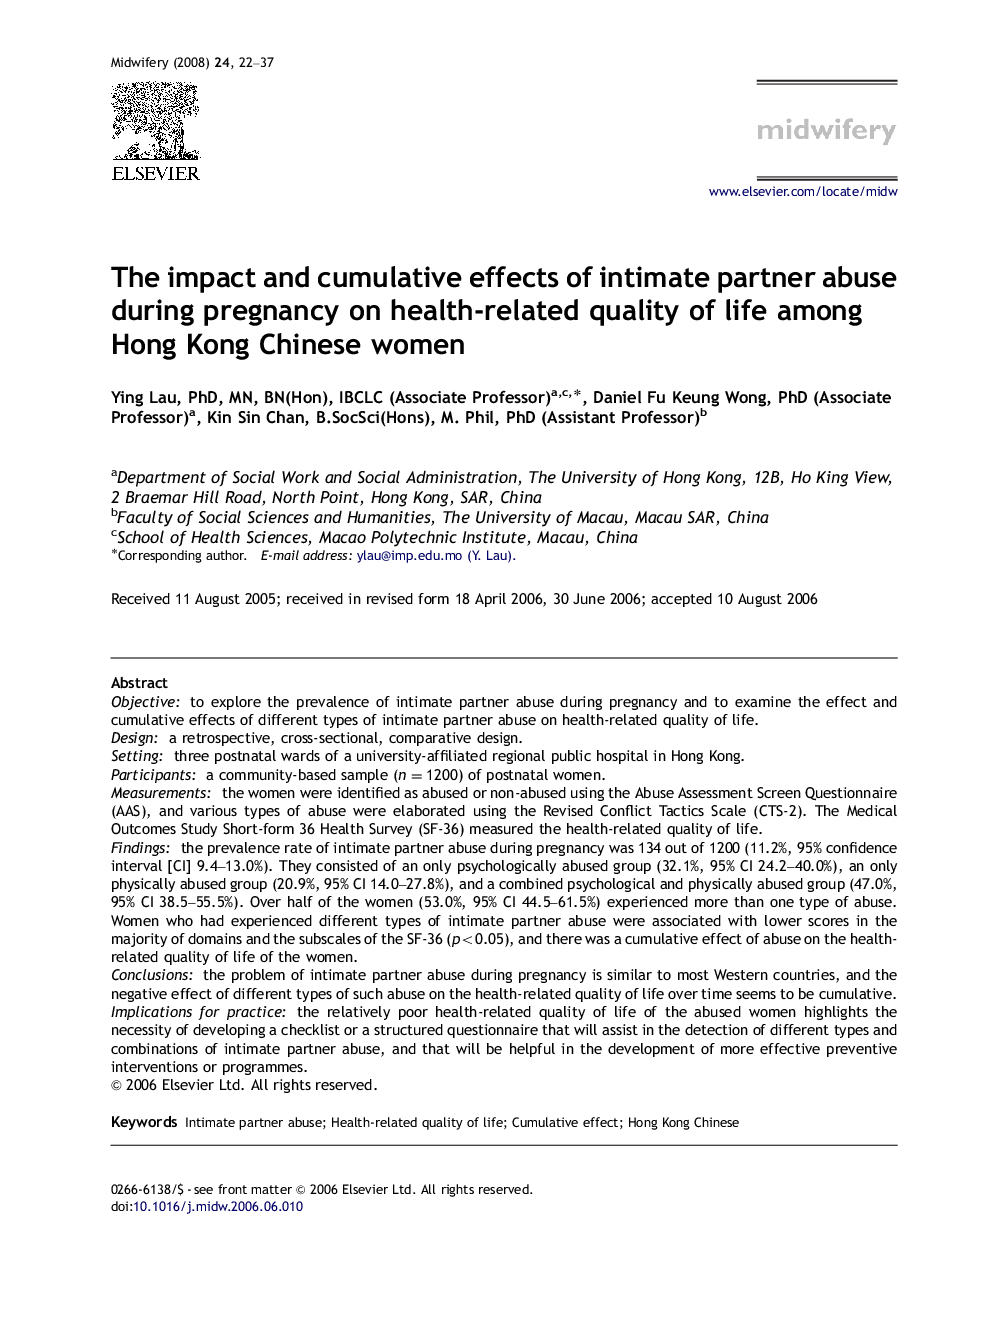 The impact and cumulative effects of intimate partner abuse during pregnancy on health-related quality of life among Hong Kong Chinese women